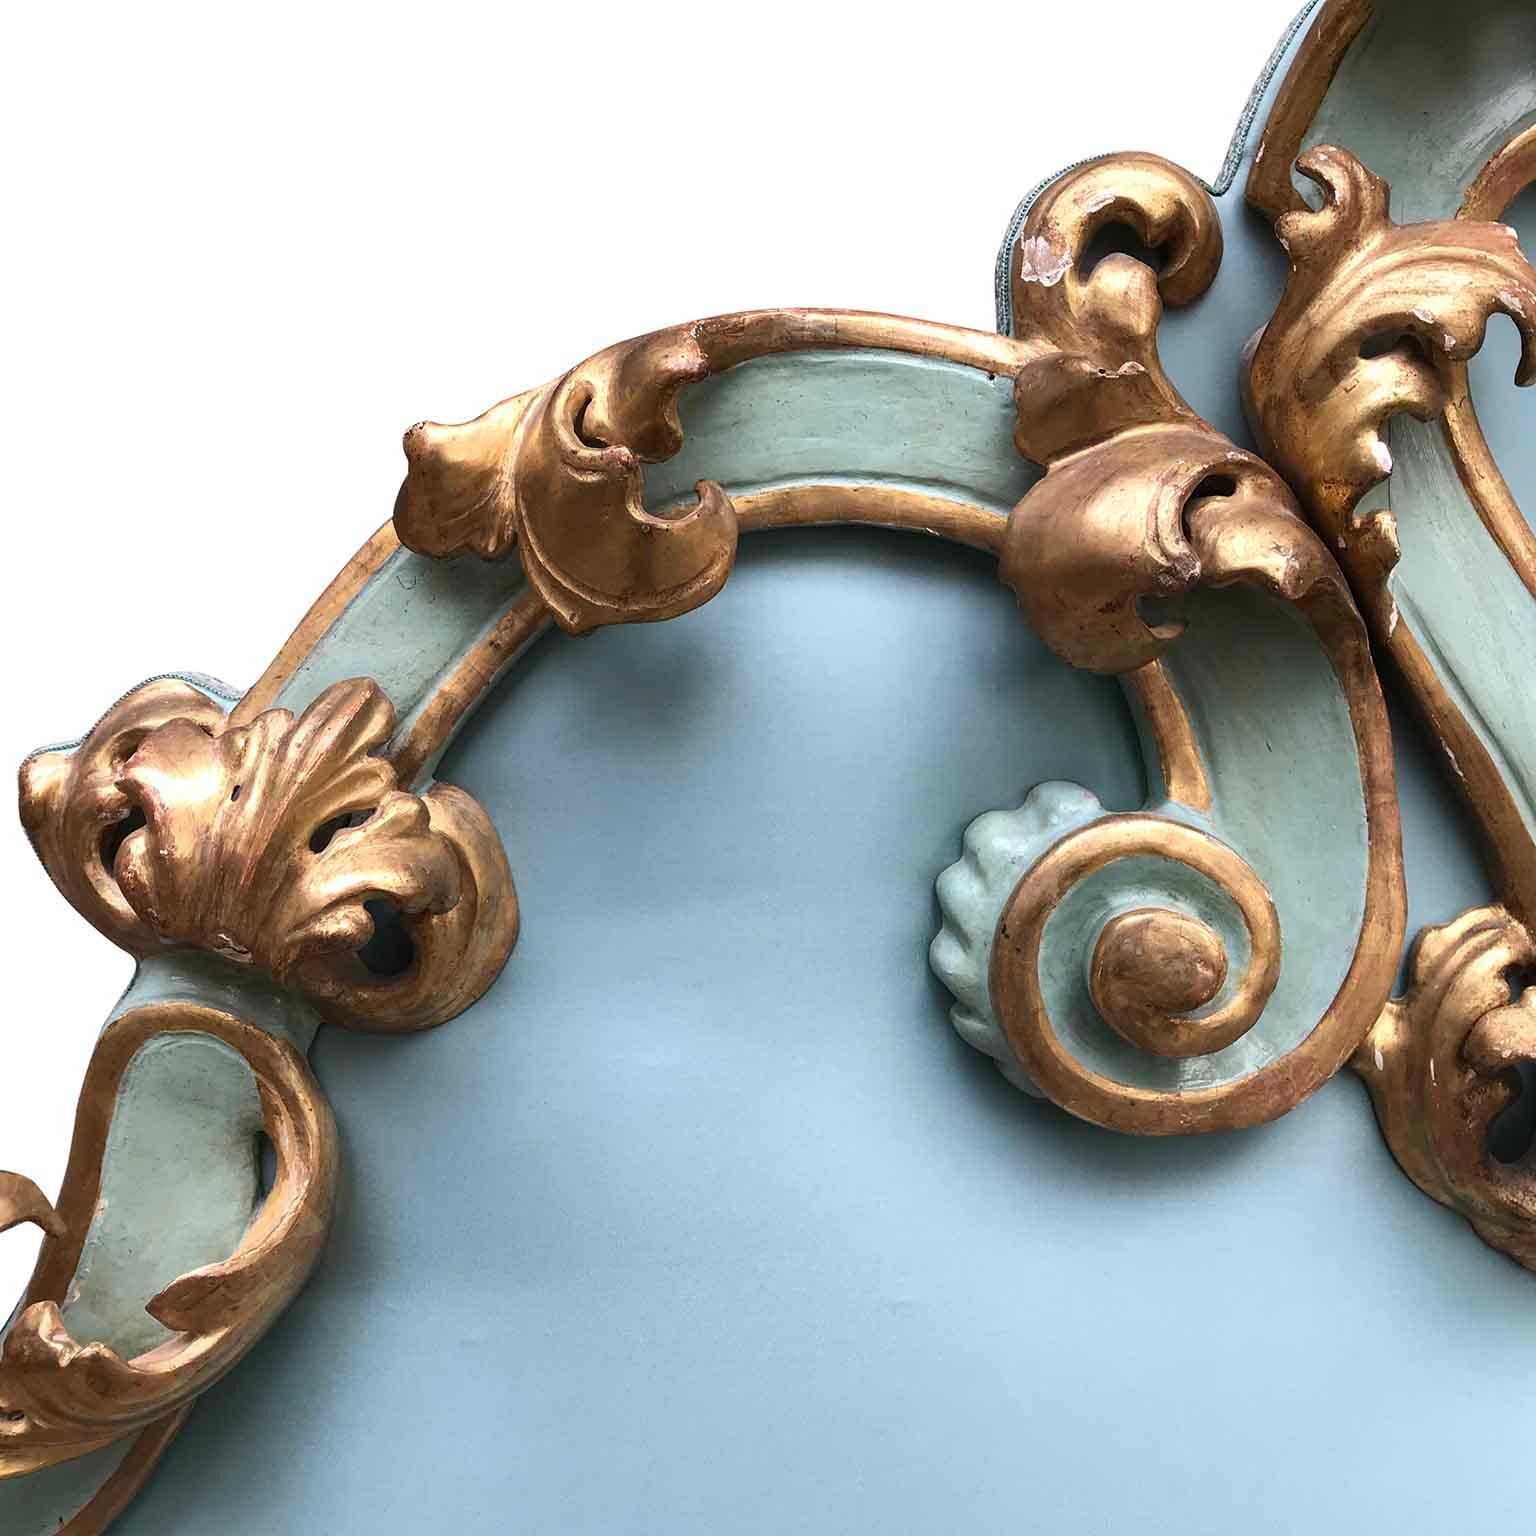 Carved Italian Baroque Style Giltwood Headboard 20th Century with Turquoise Upholstery